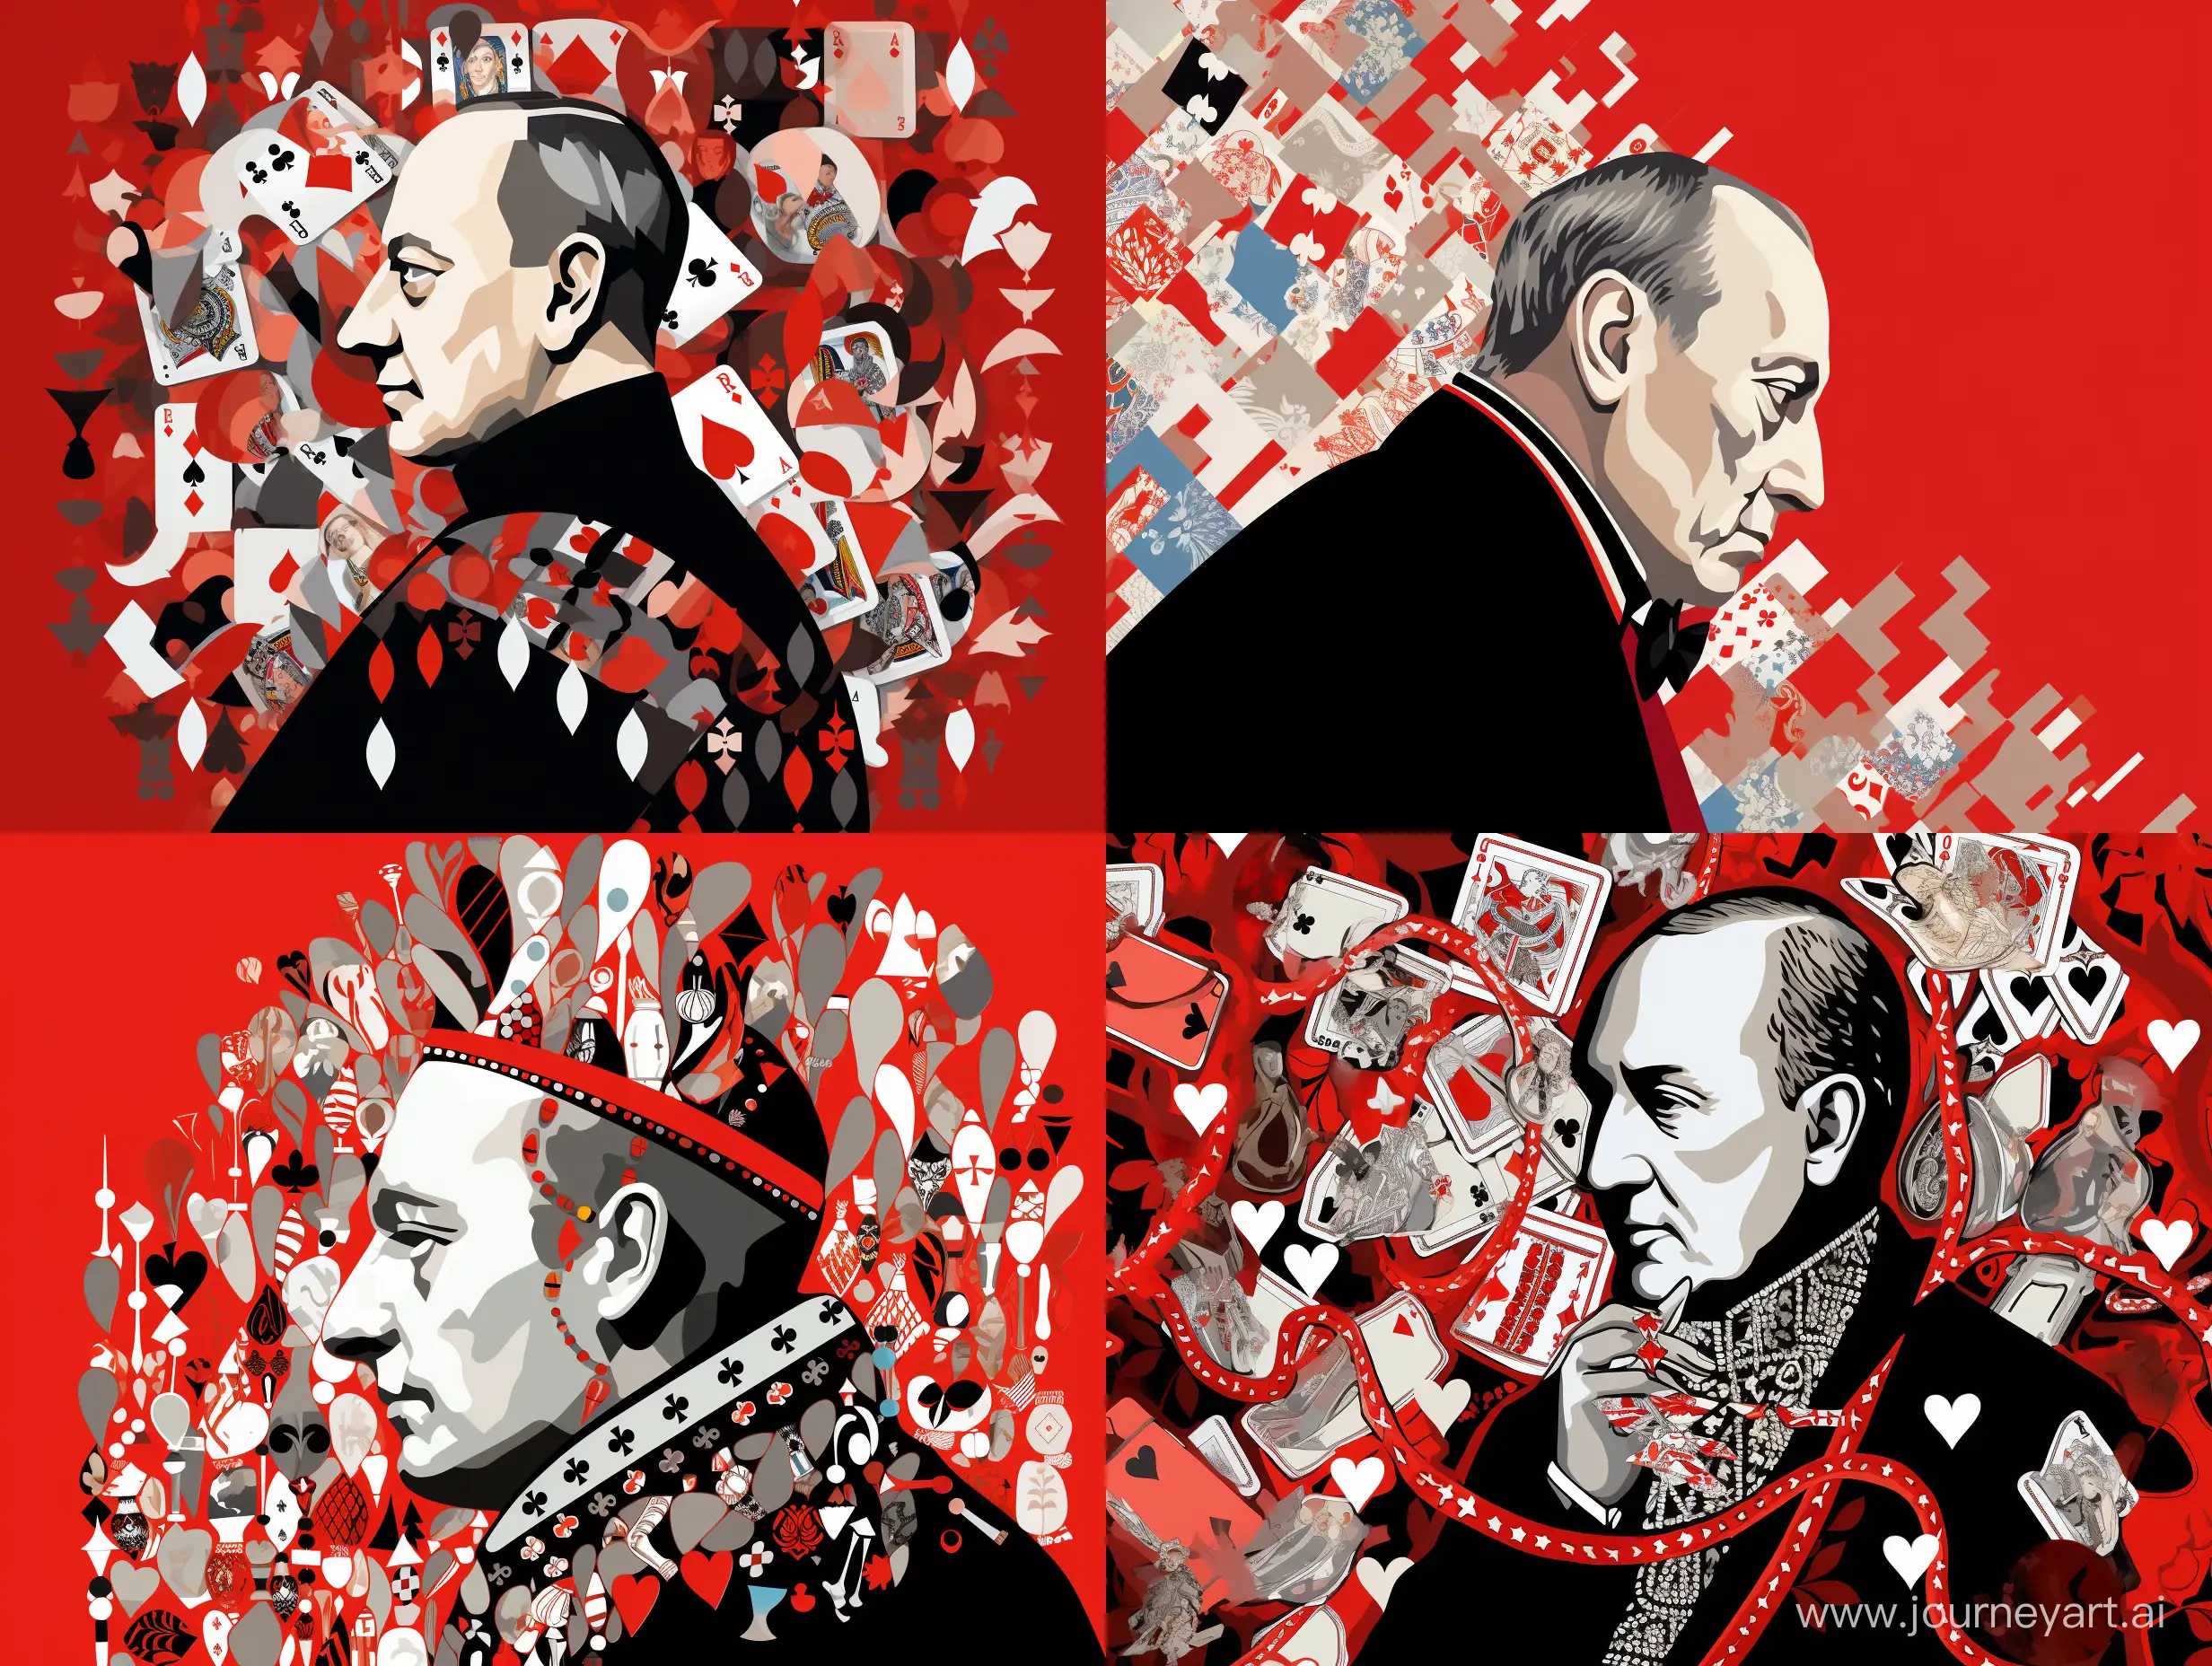 A waist-high portrait of Christian Dior in profile, middle-aged, looking forward, with accessories from Dior, with a small crown on his head, a lot of details, against a background of a pattern of diamonds, hearts, clubs, spades. colors black, white, red, gray, white on the edge, fashion illustration style, pop art style